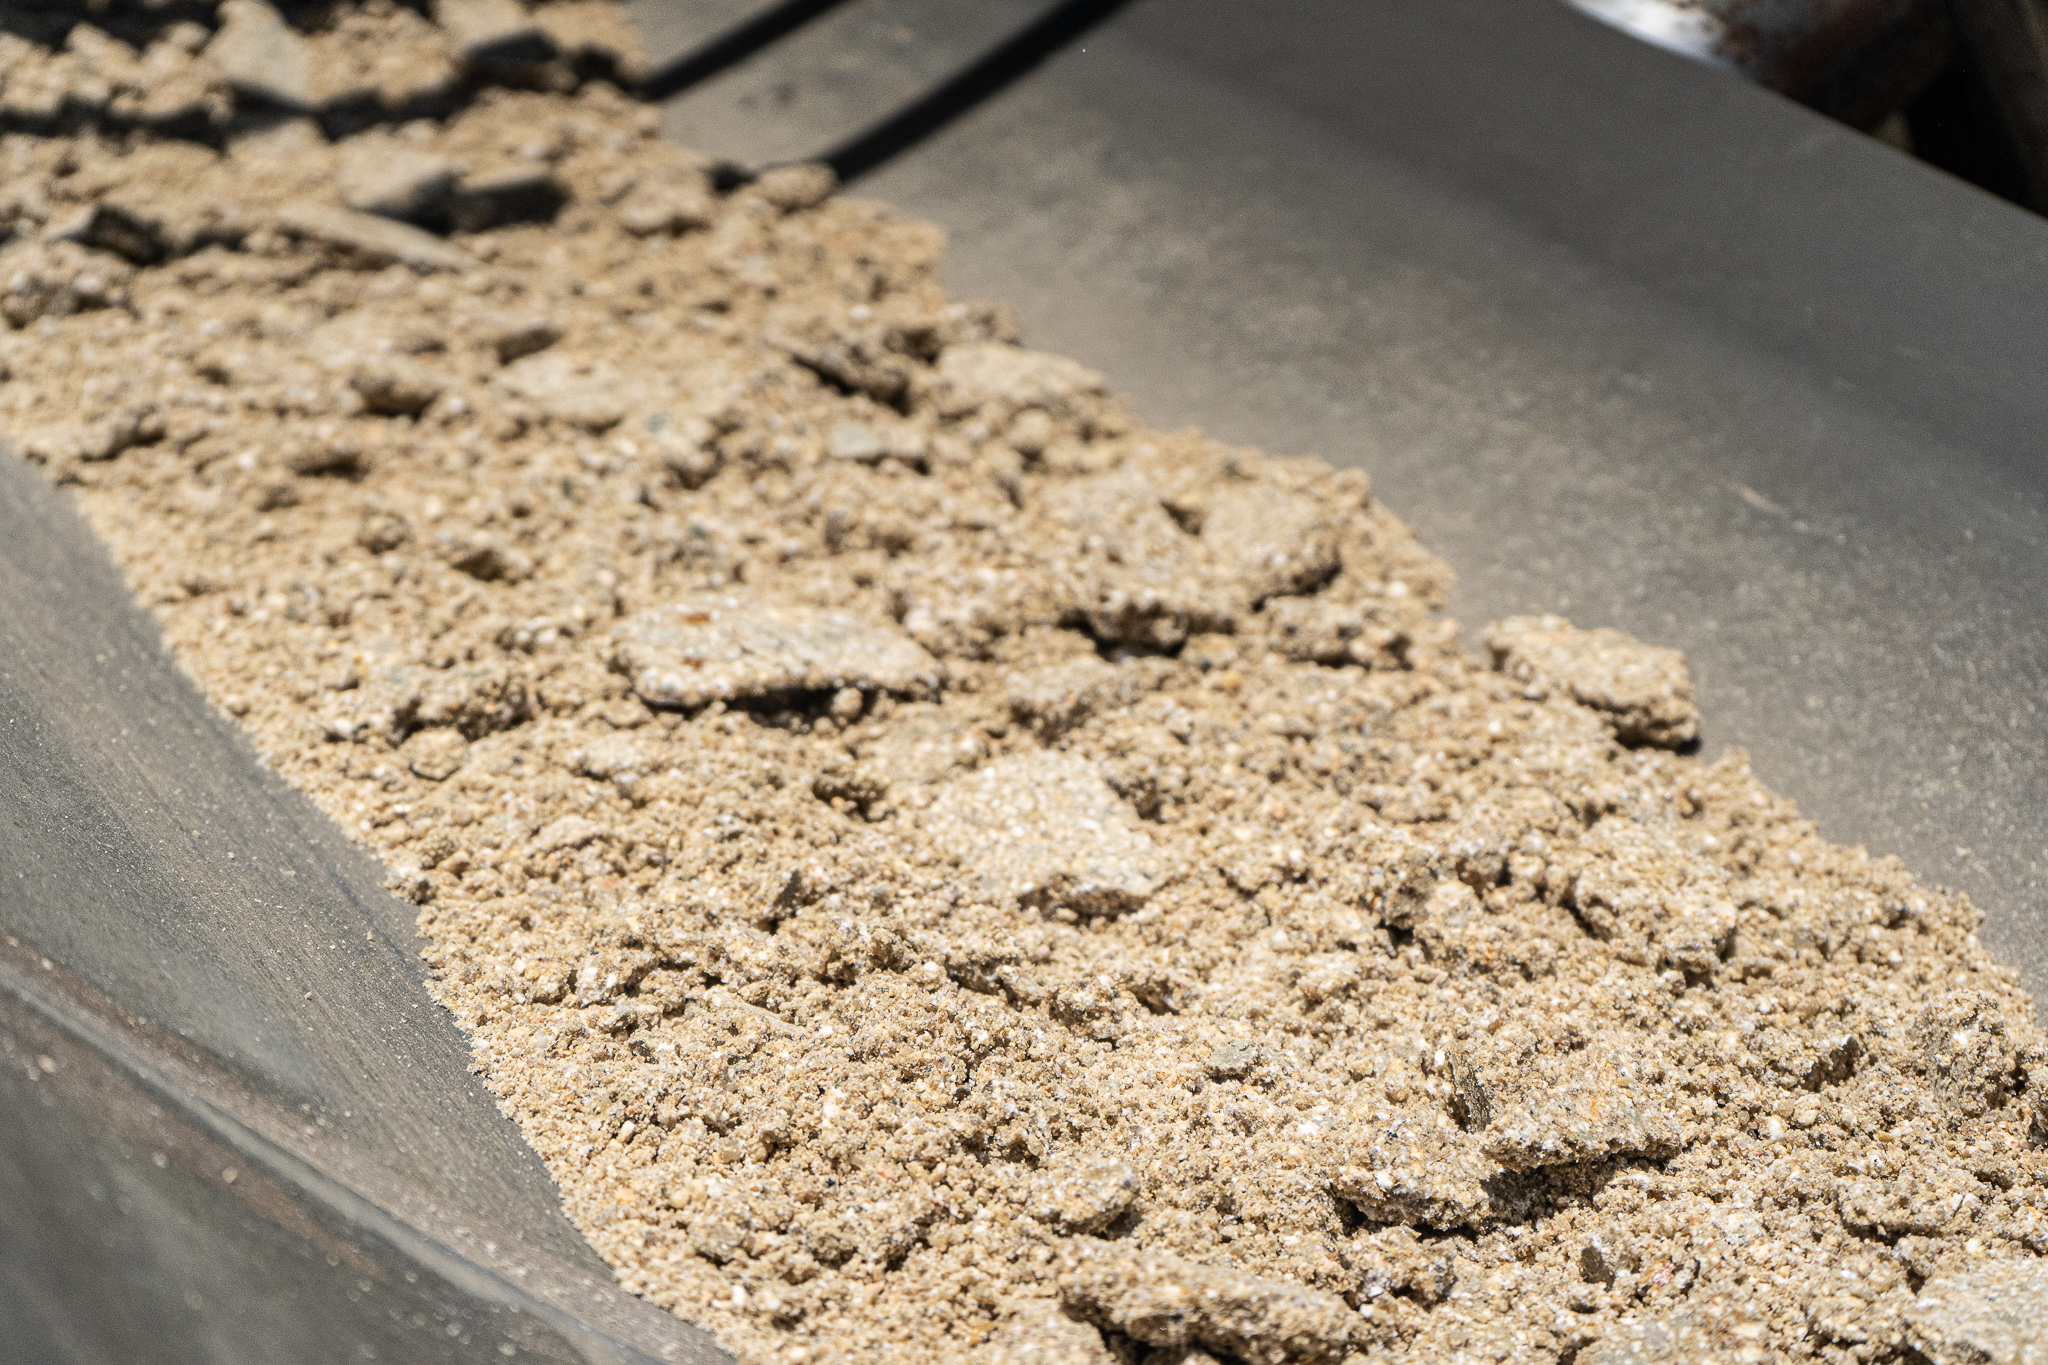 Save up to 15% of cement in the concrete mix by using Metso industrial process.